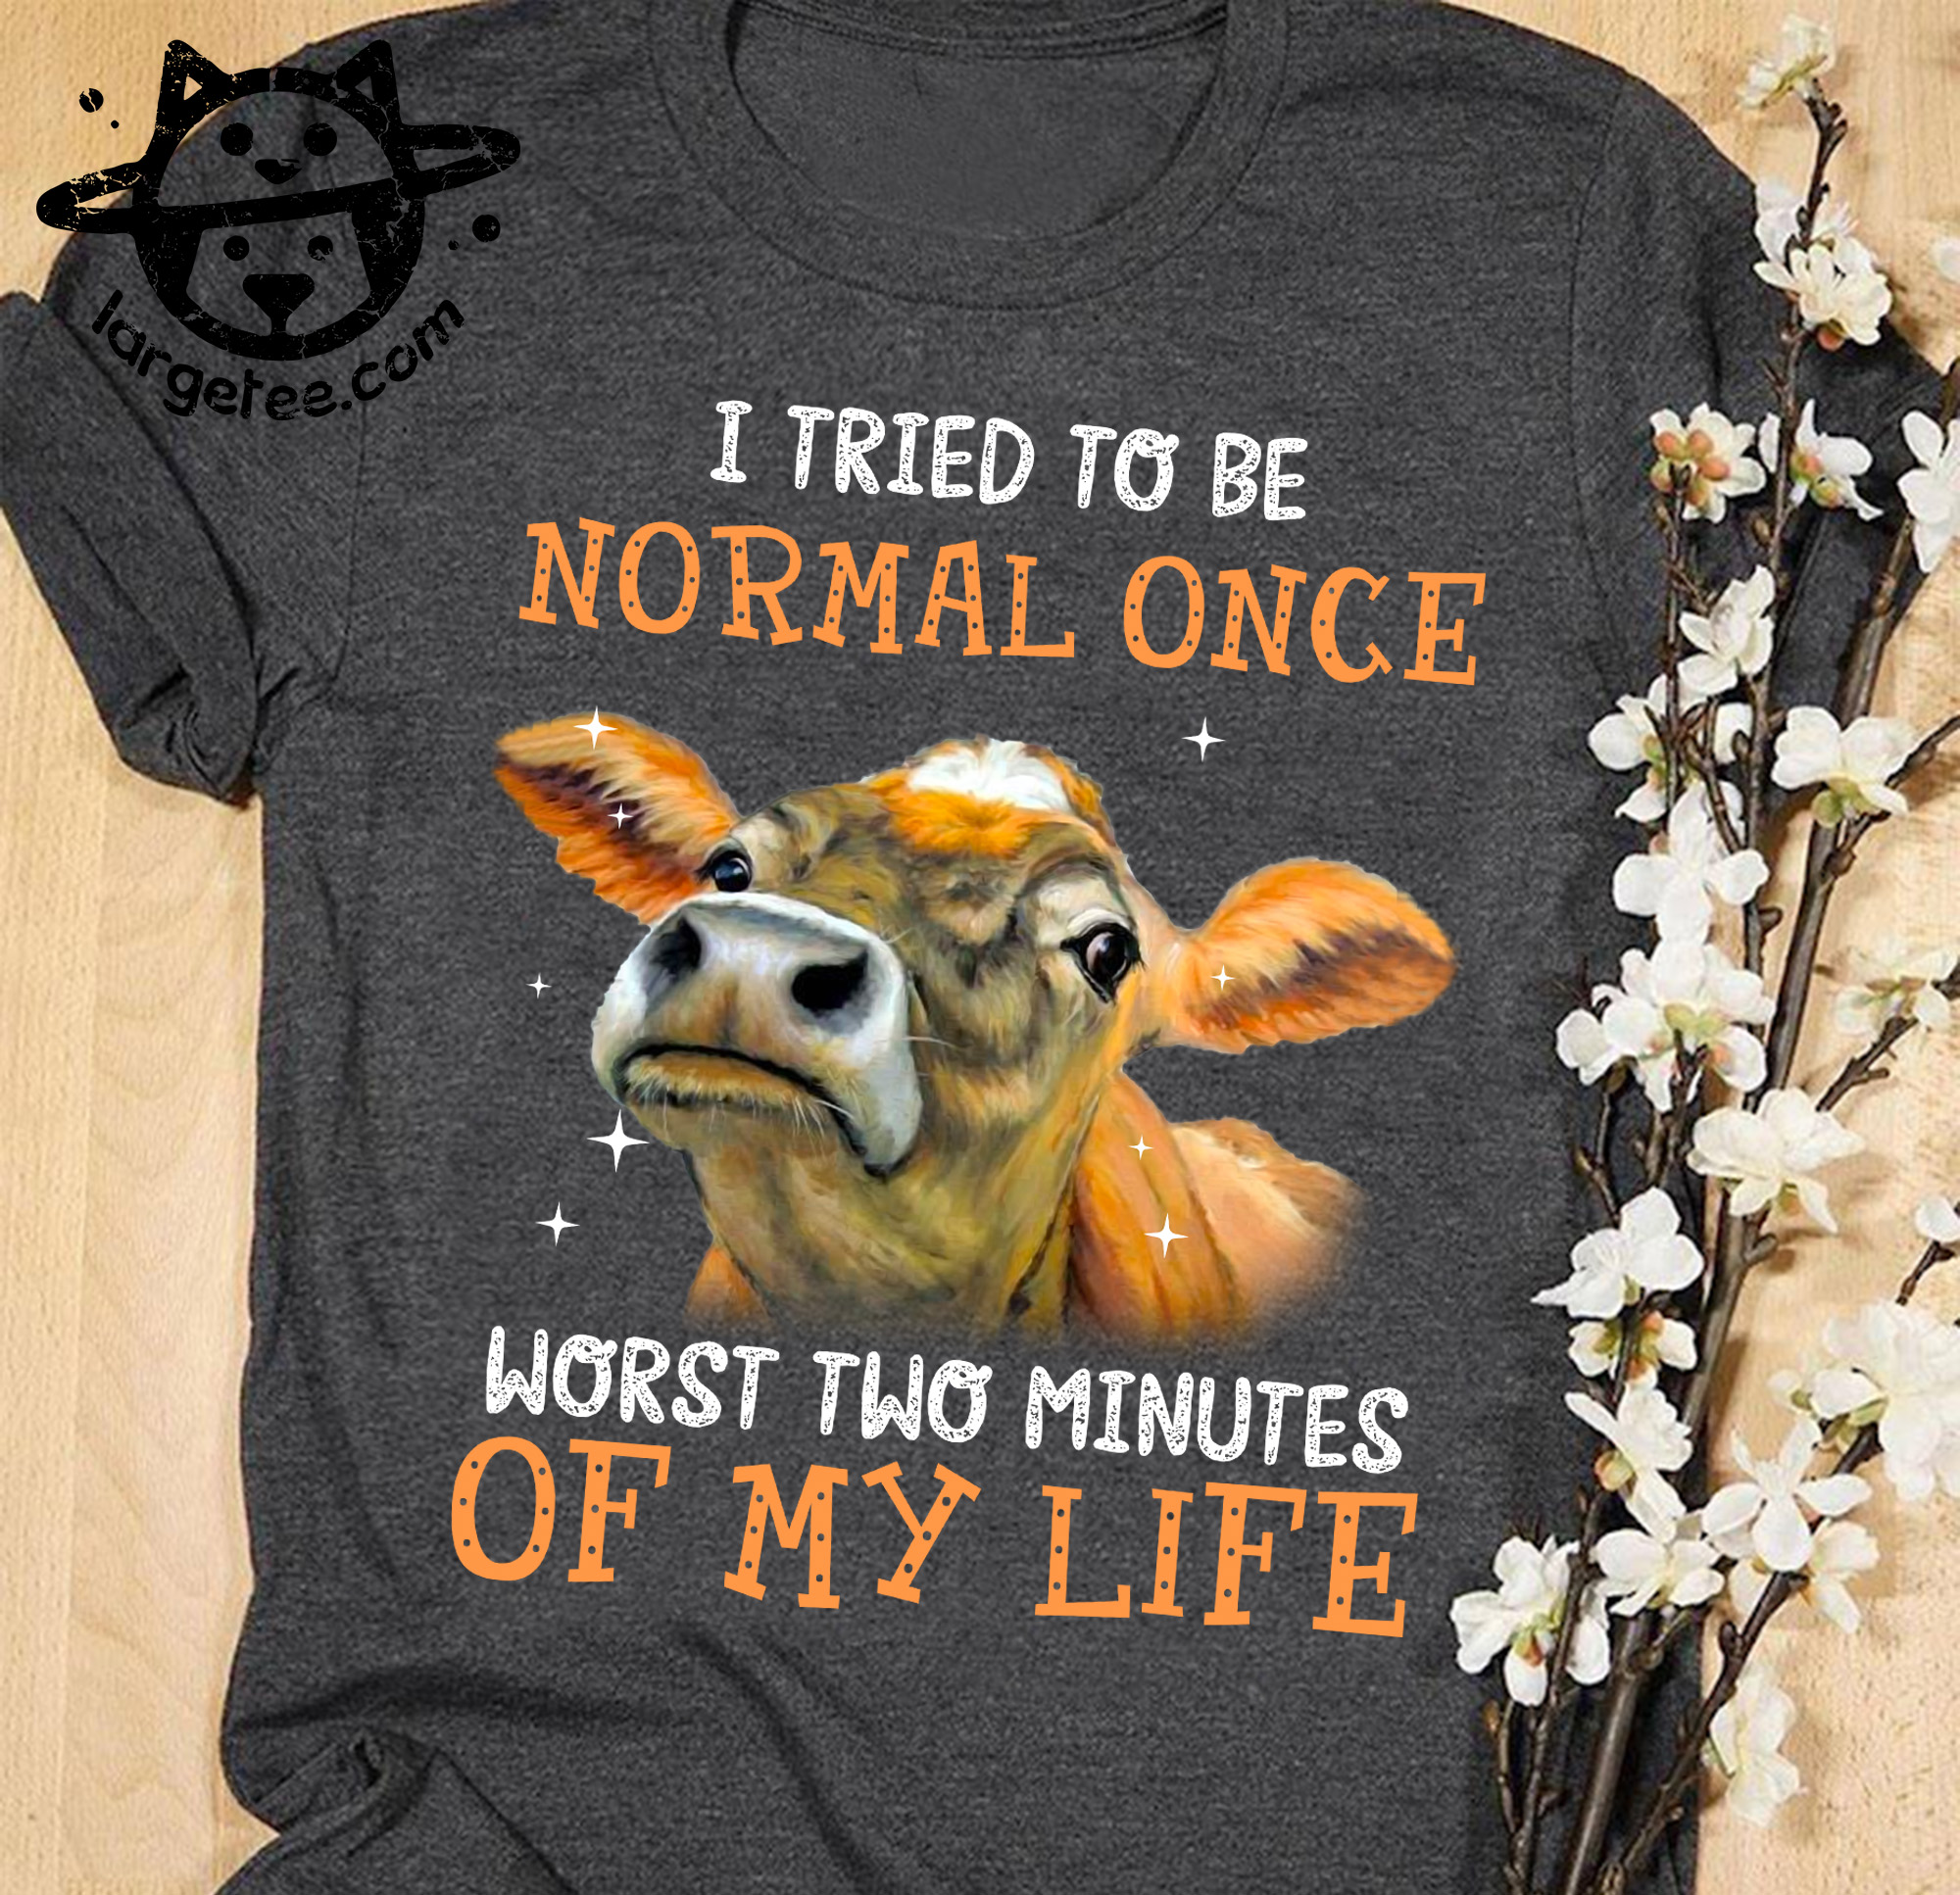 I tried to be normal once worst two minutes of my life - Cow